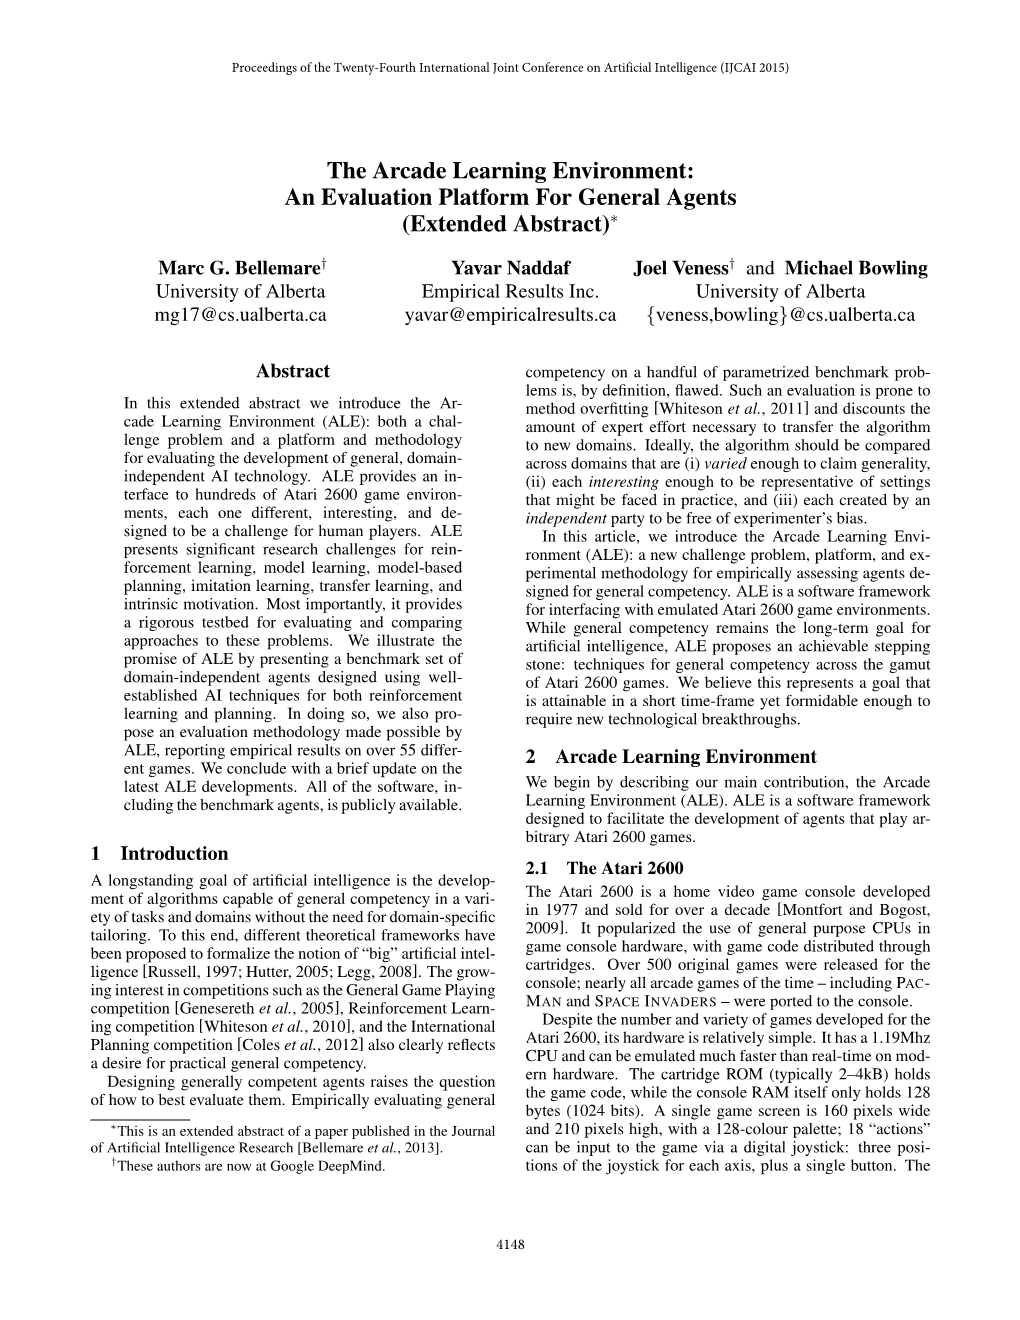 The Arcade Learning Environment: an Evaluation Platform for General Agents (Extended Abstract)∗